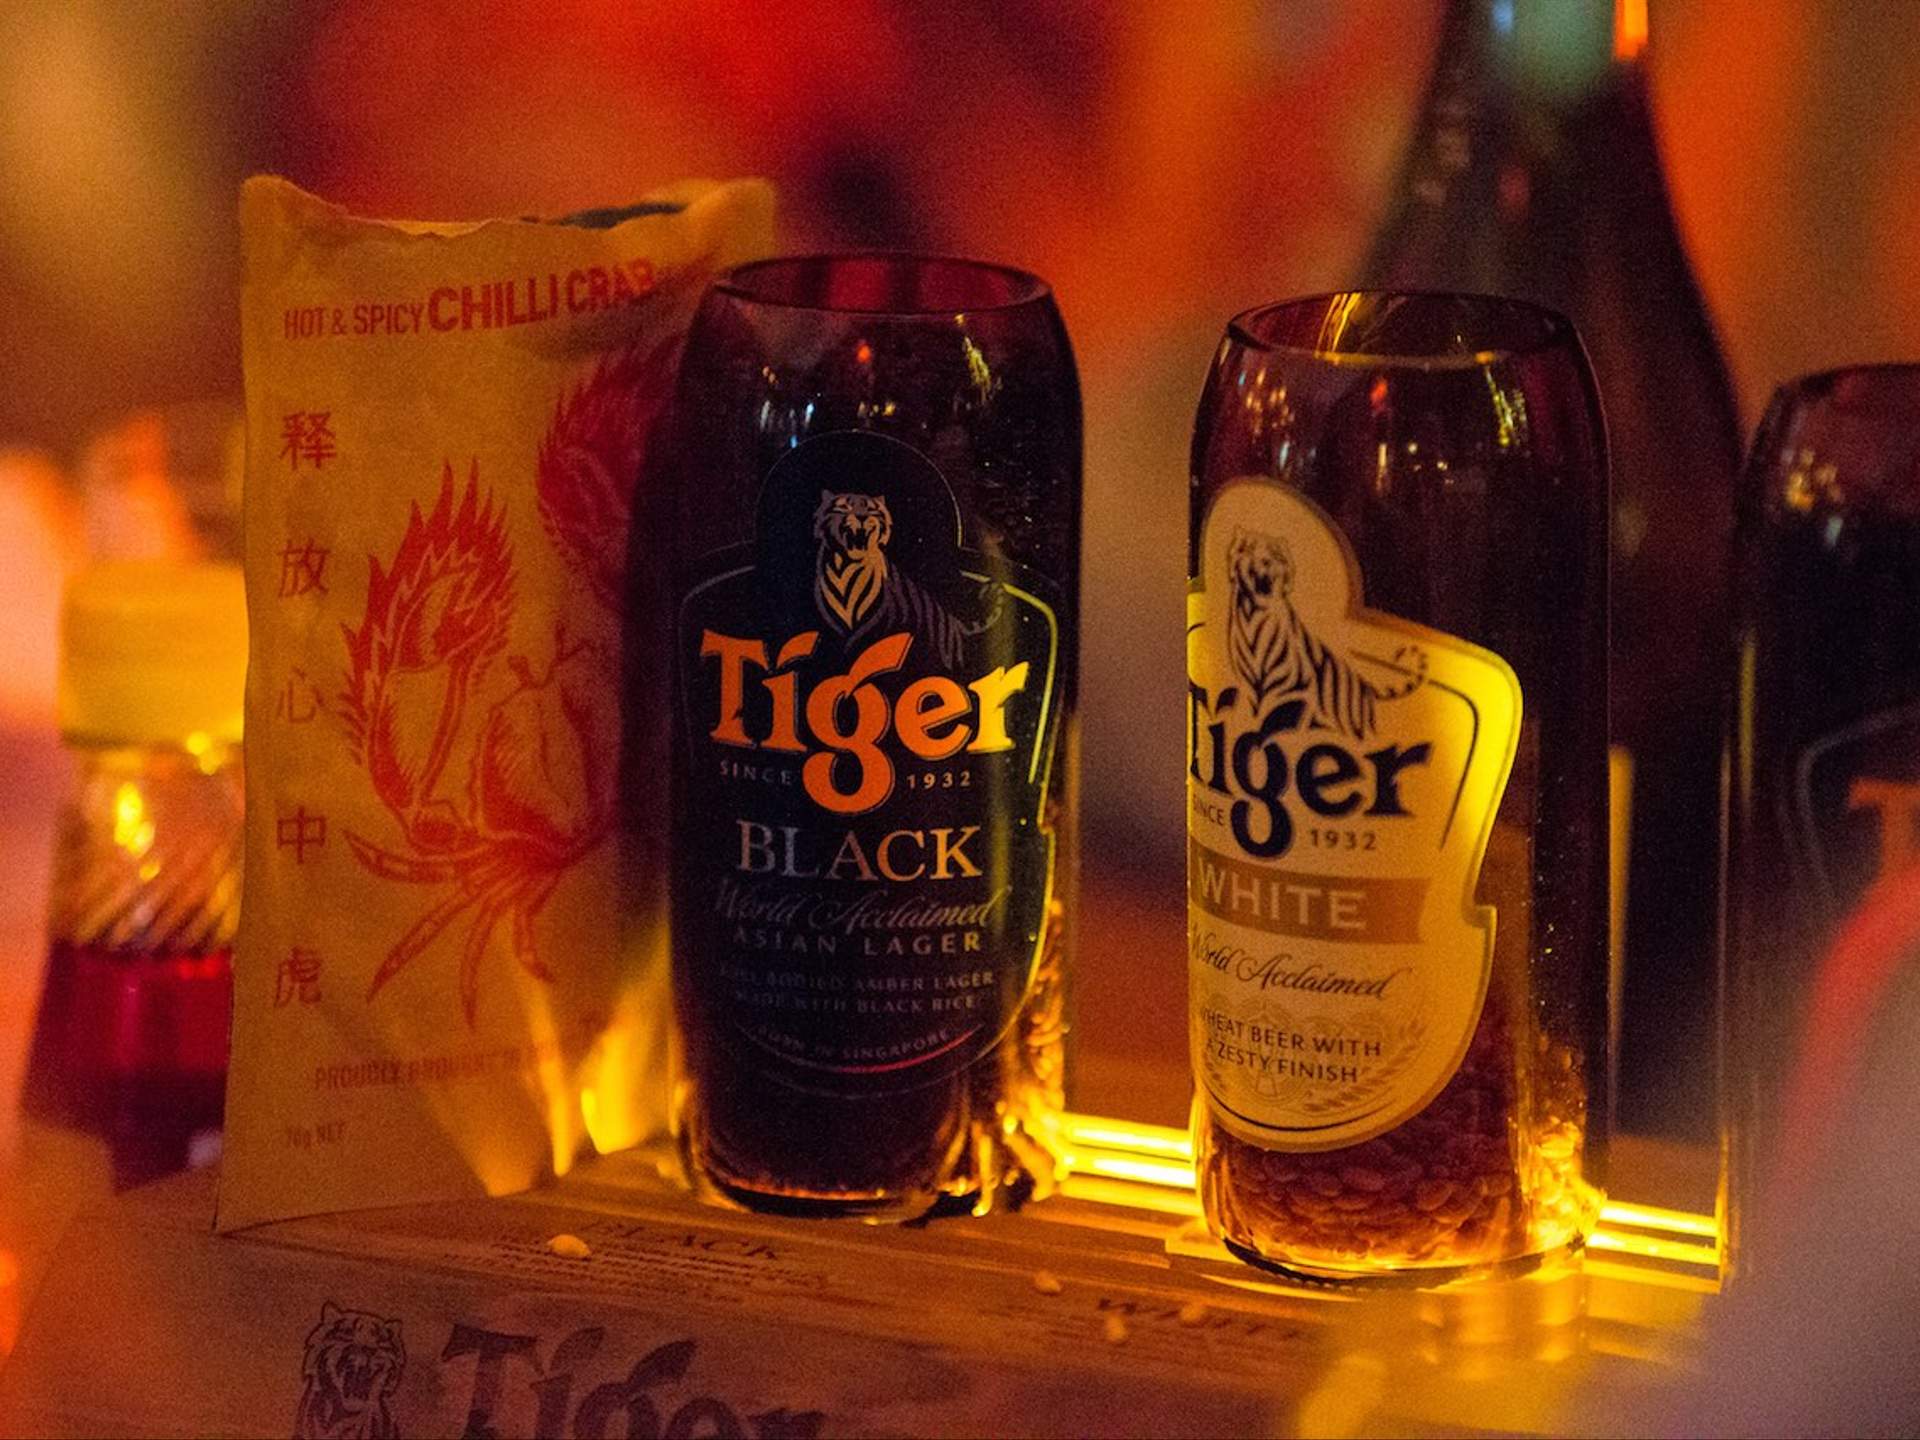 View Photo of Tiger Beer presents Streets of Singapore at The Street Food Collective